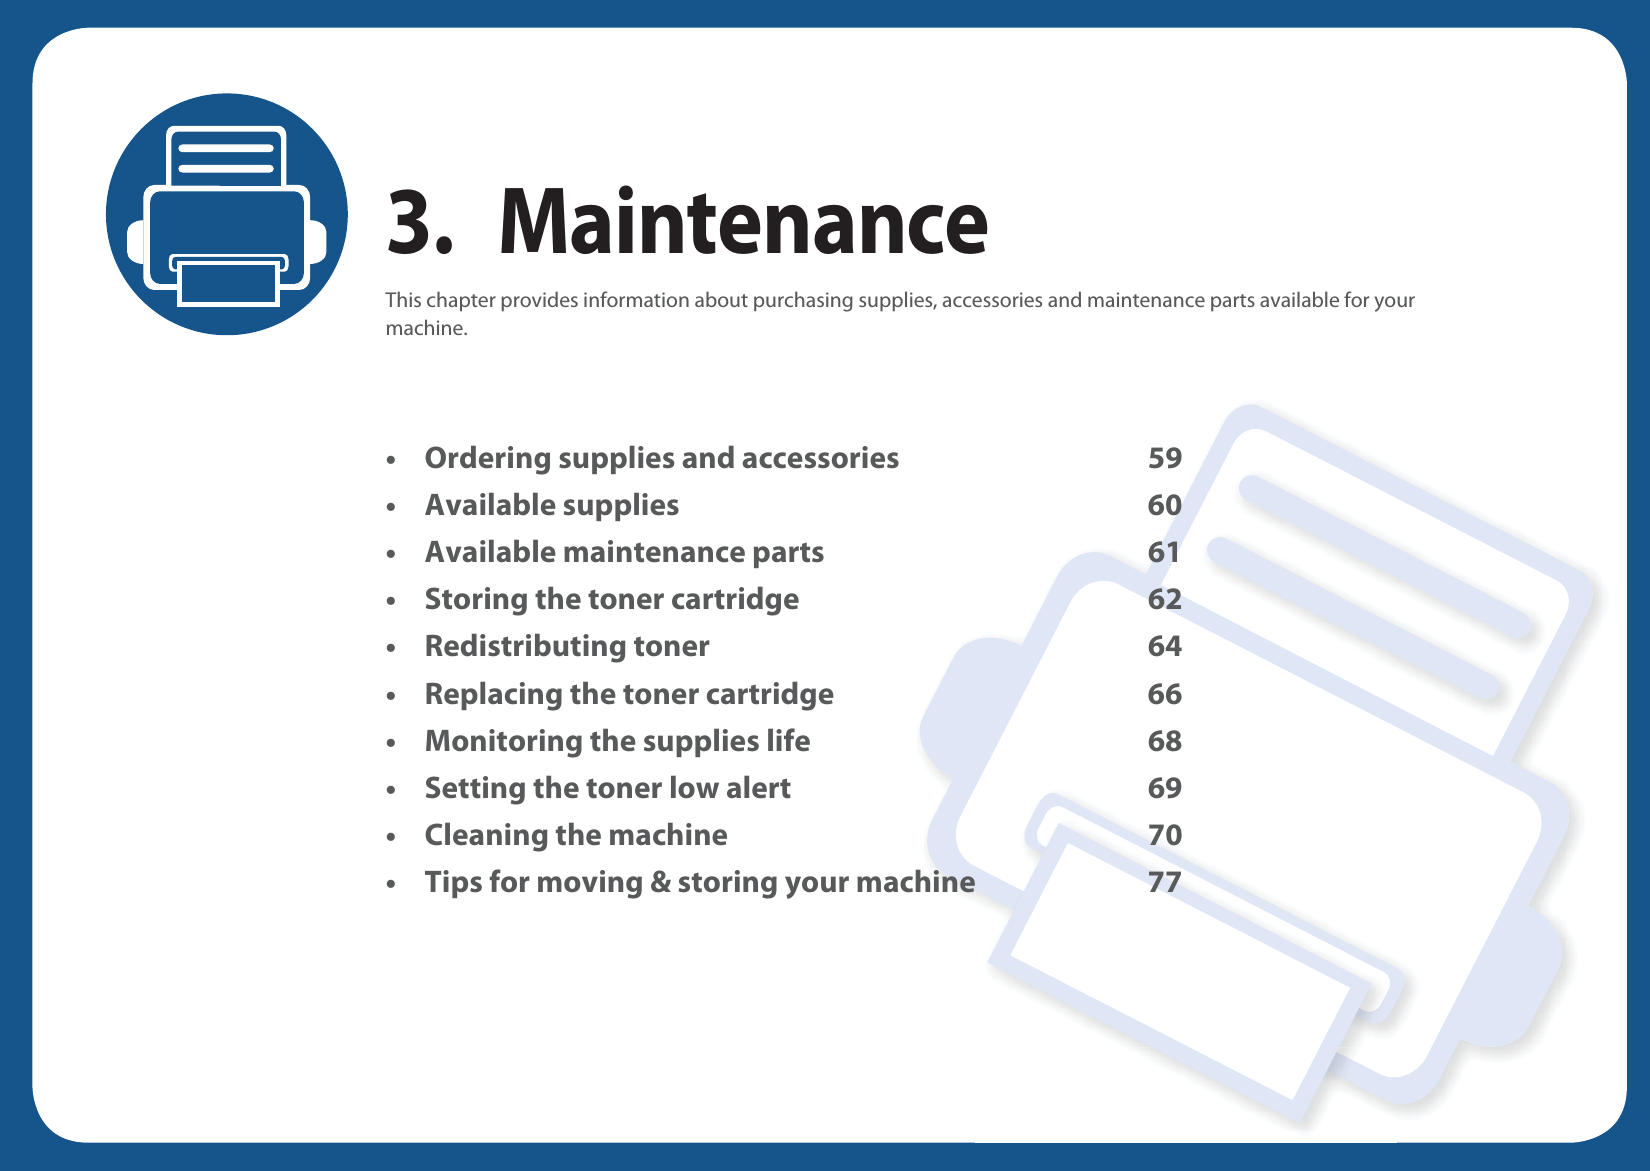 3. MaintenanceThis chapter provides information about purchasing supplies, accessories and maintenance parts available for your machine.• Ordering supplies and accessories 59• Available supplies 60• Available maintenance parts 61• Storing the toner cartridge 62• Redistributing toner 64• Replacing the toner cartridge 66• Monitoring the supplies life 68• Setting the toner low alert 69• Cleaning the machine 70• Tips for moving &amp; storing your machine 77